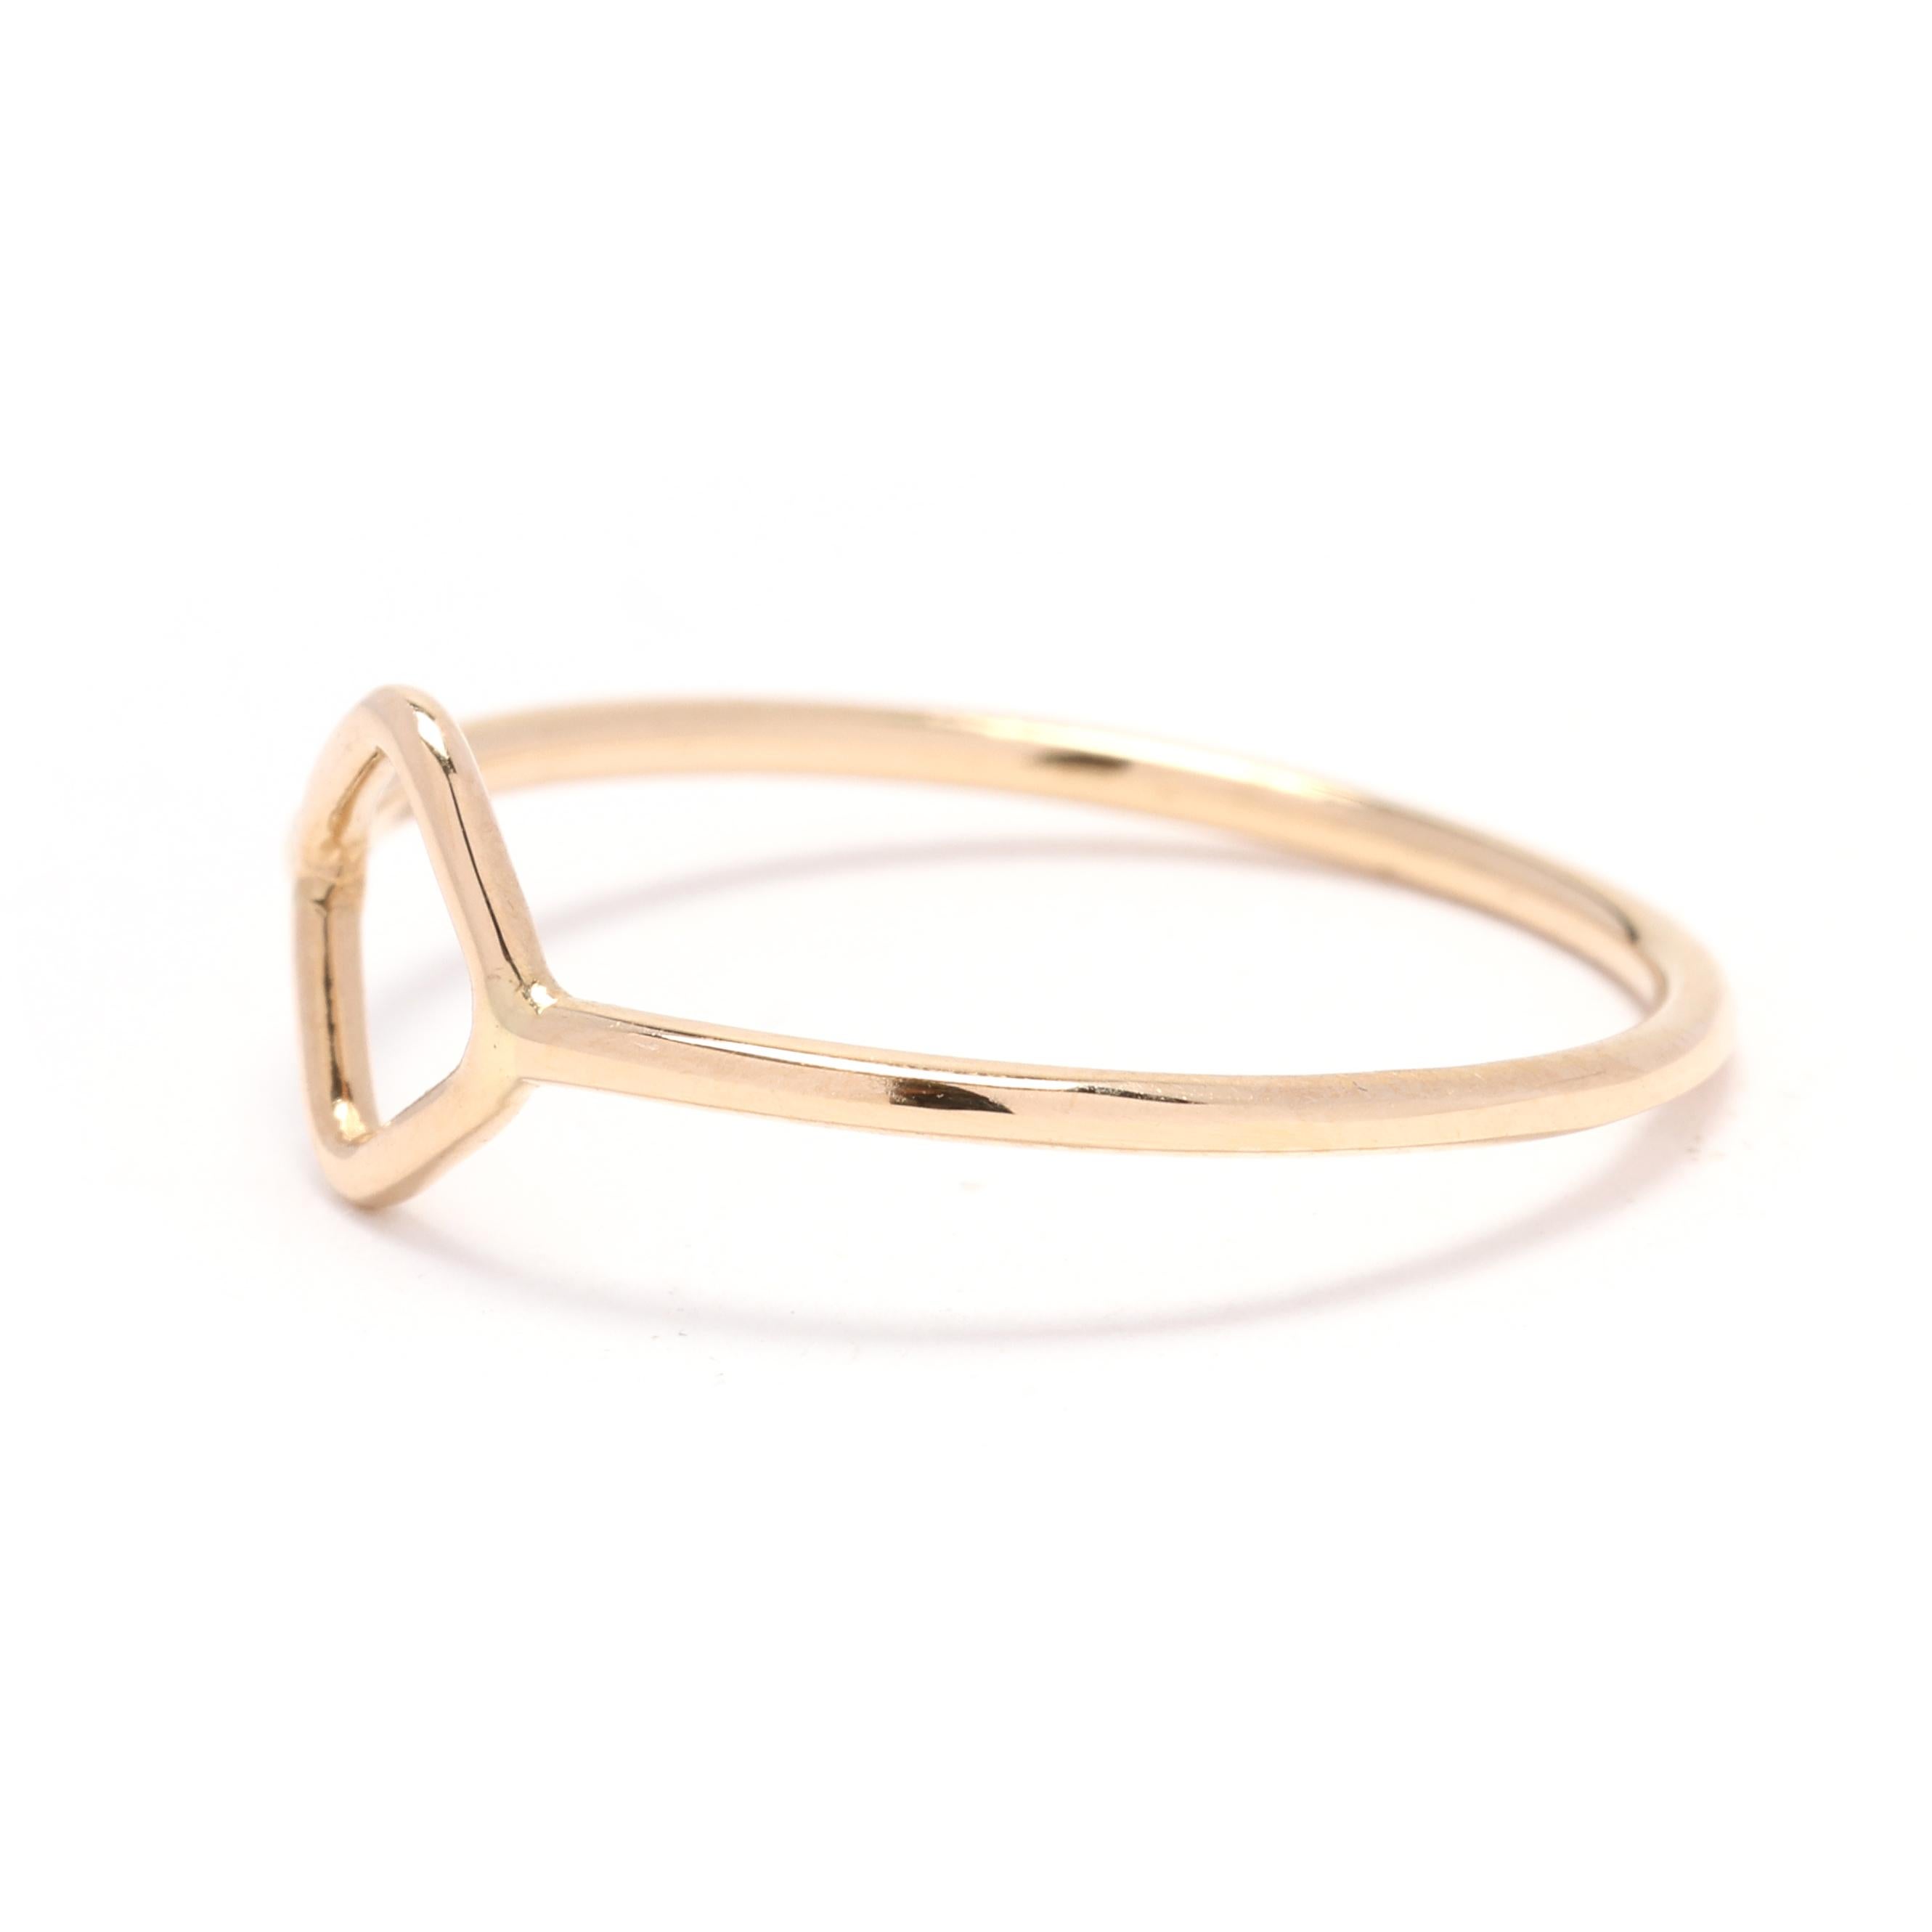 Women's or Men's 14K Yellow Gold Open Square Ring, Ring Size 6, Dainty Ring, Everyday Wear